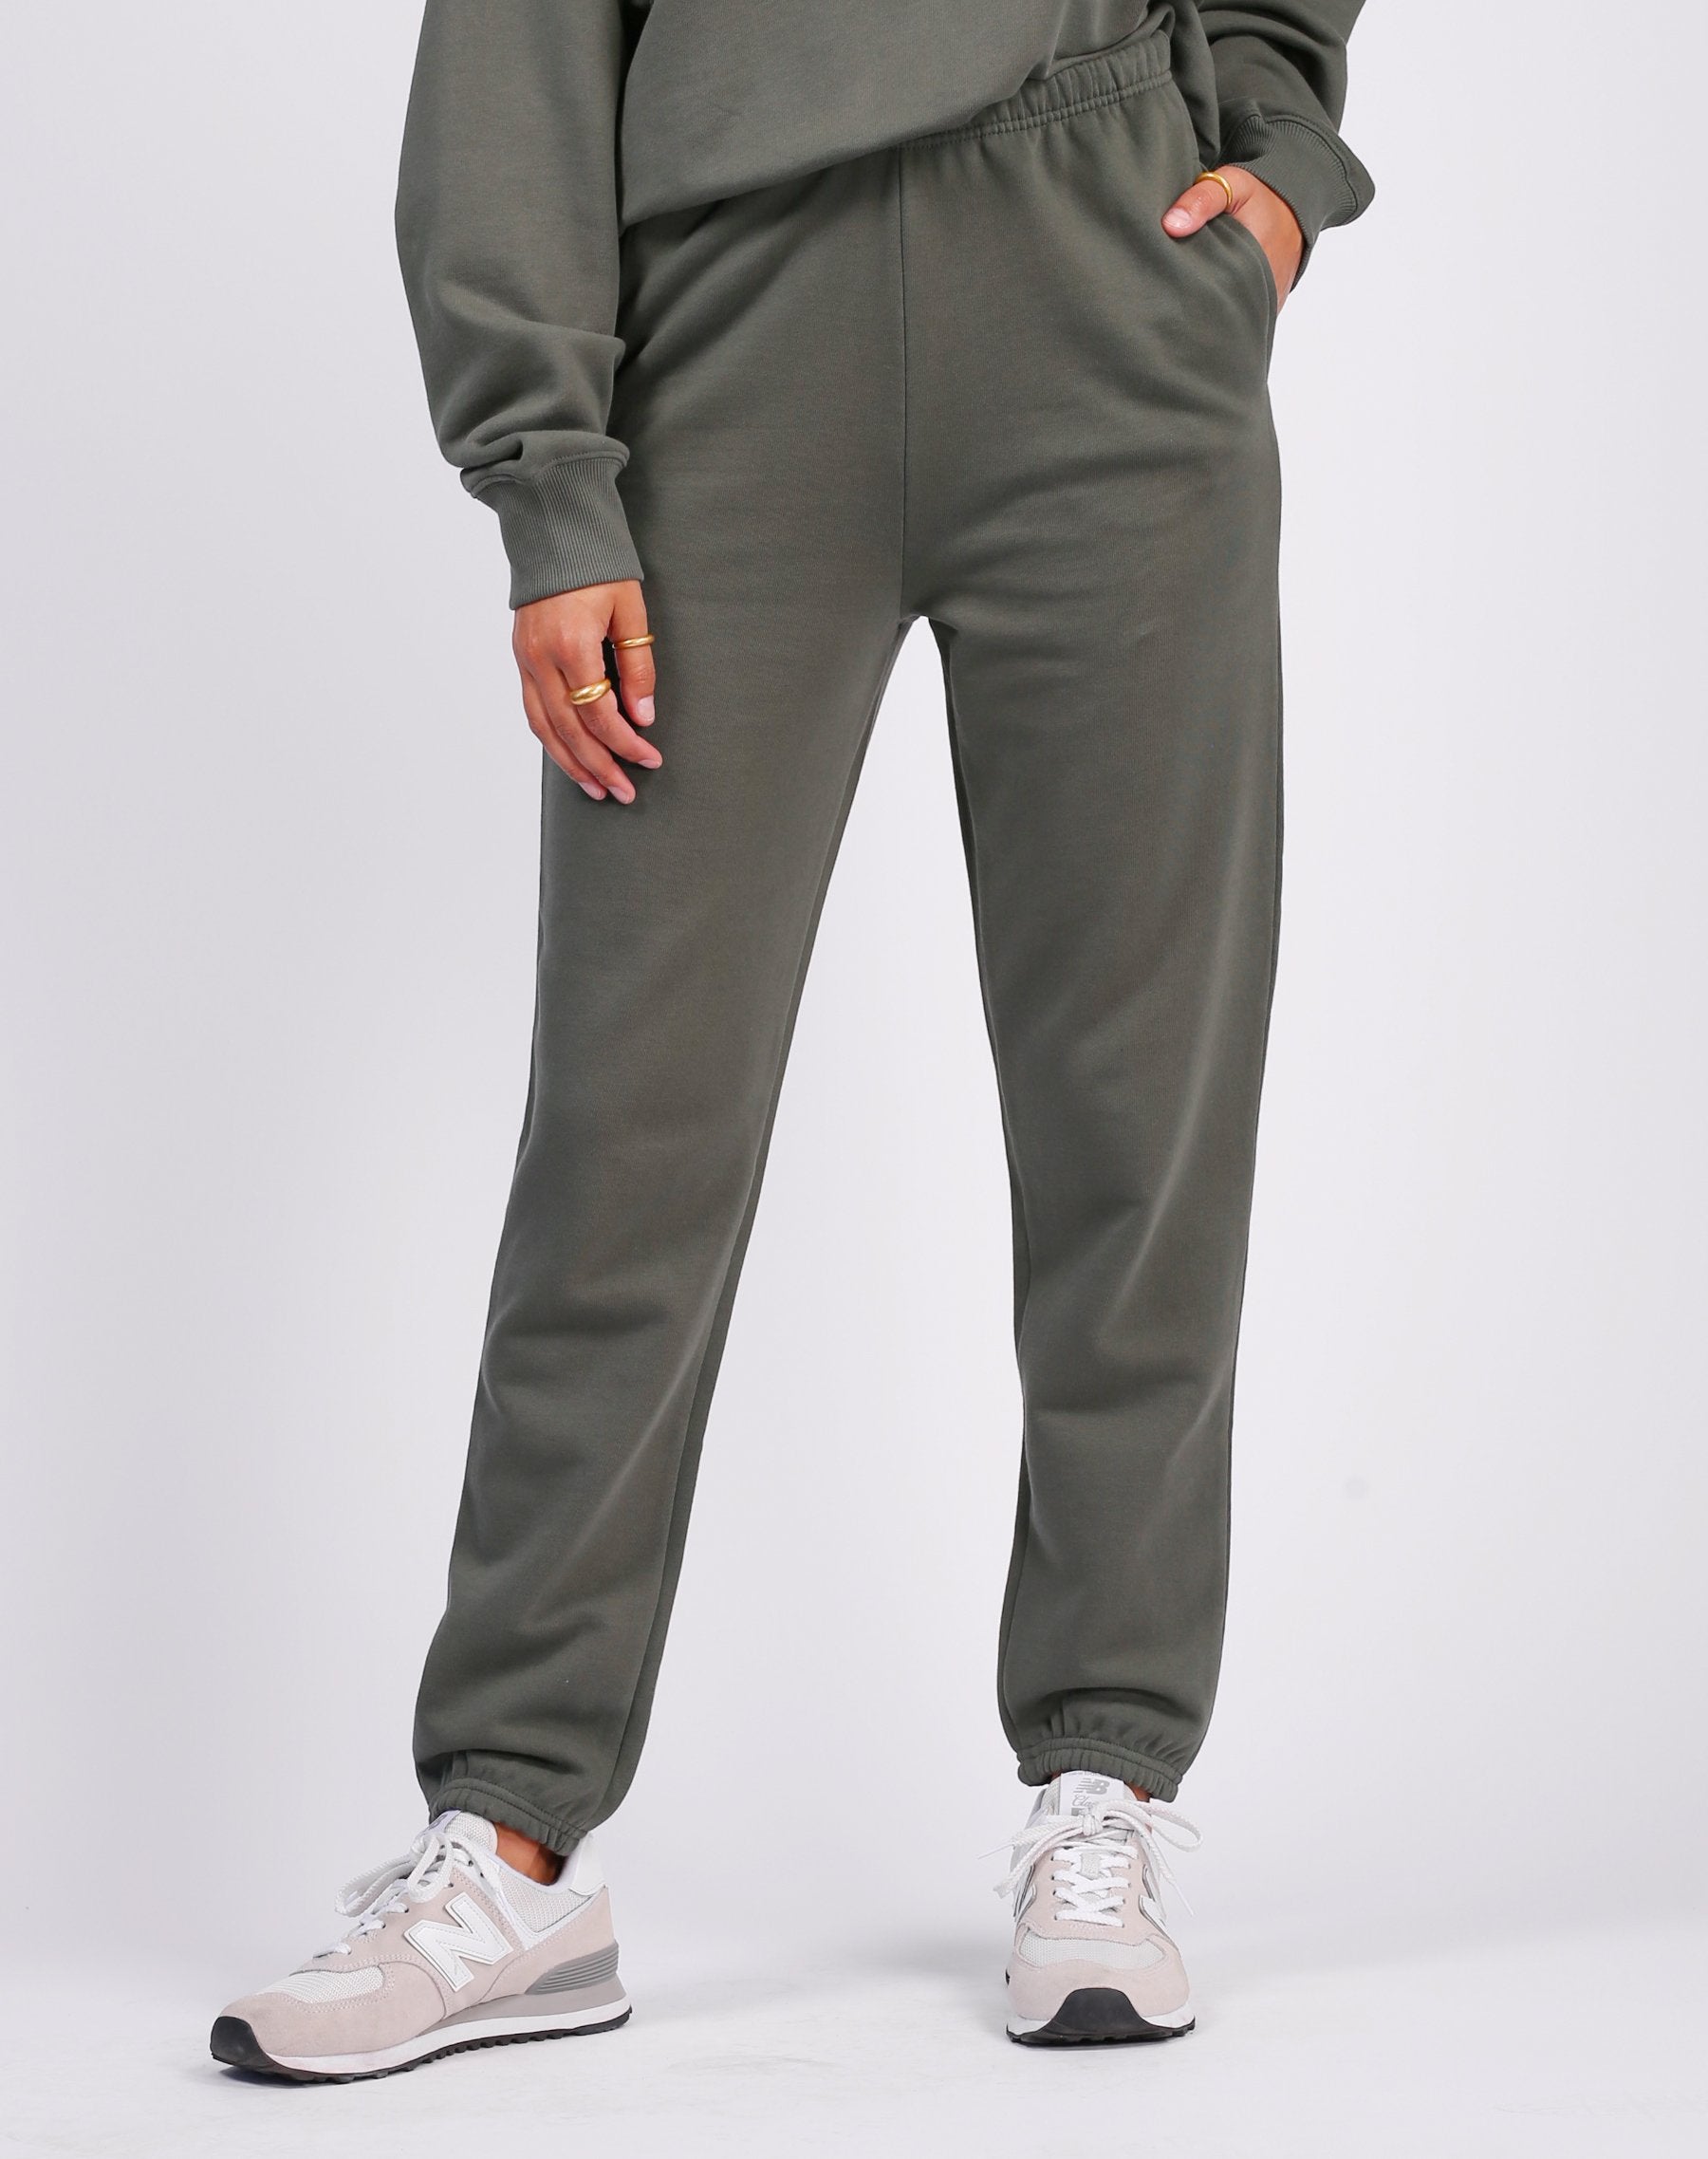 These Relaxed-Fit Joggers Are on Sale at  — Over 65,000 5-Star Reviews